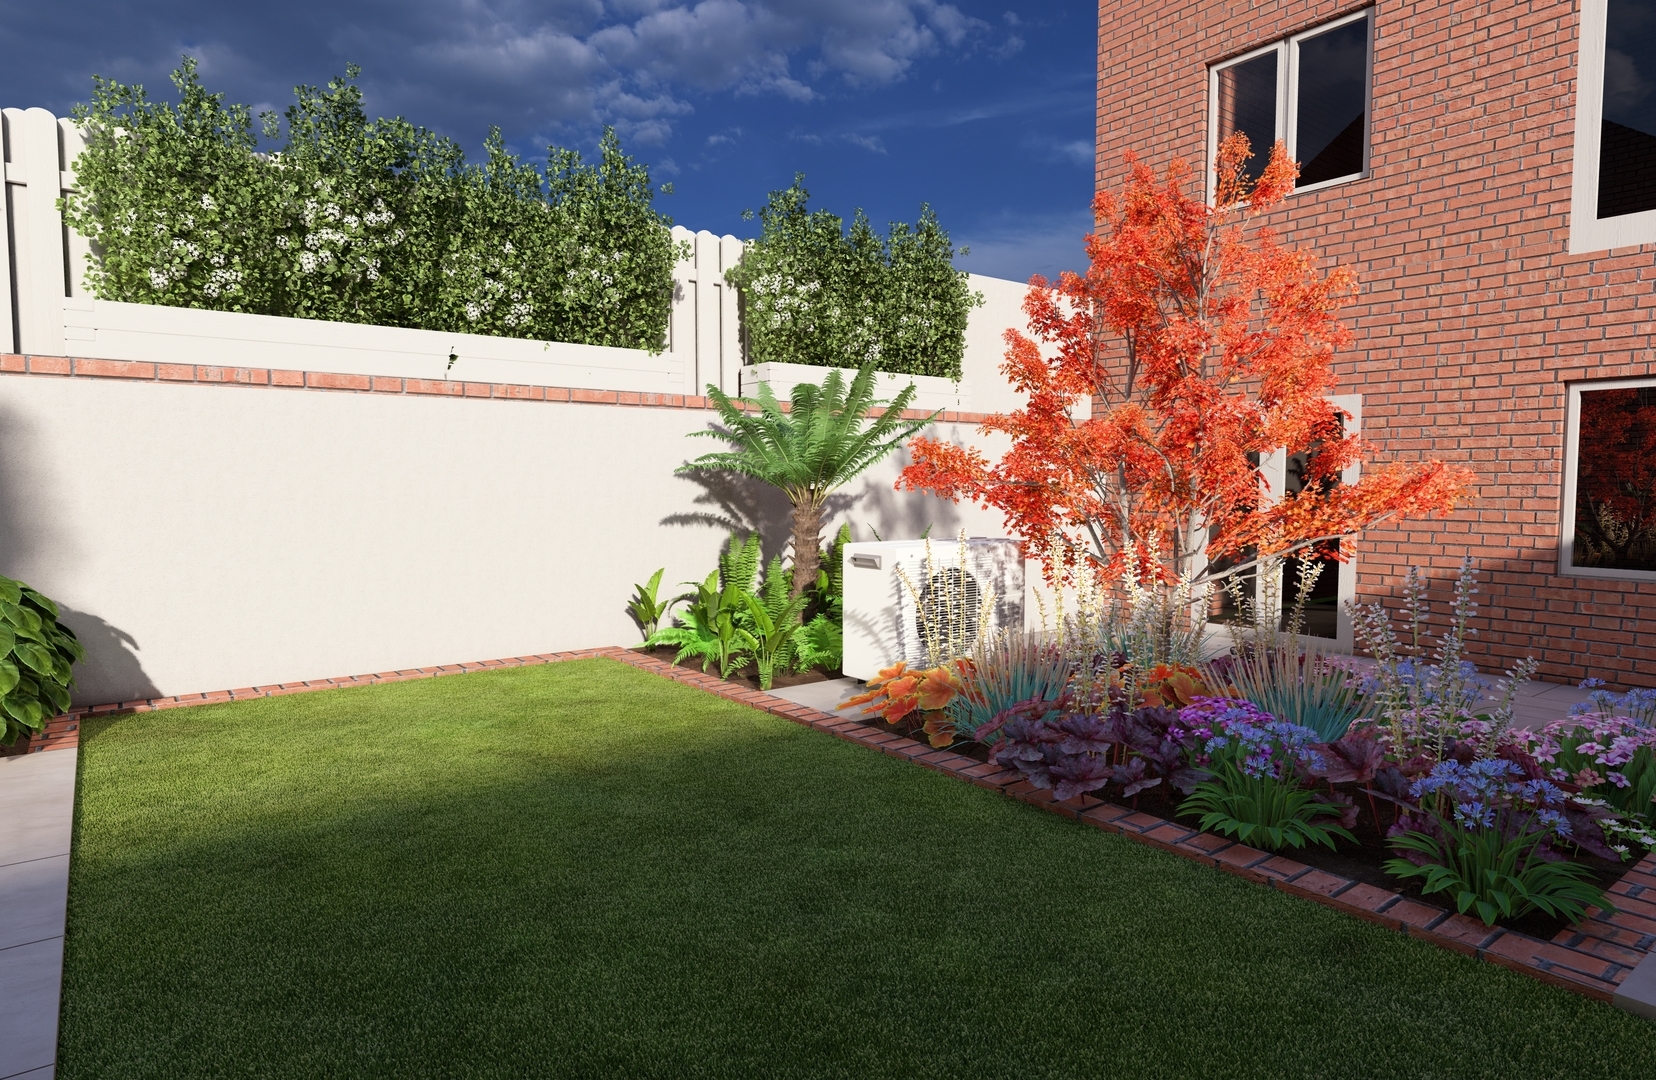 Garden Design for a modest size new split level garden in Kimmage, Dublin 6W with emphasis on a natural outdoor area with modest grass lawn area and plenty of colourful seasonal plant displays throughout the year.